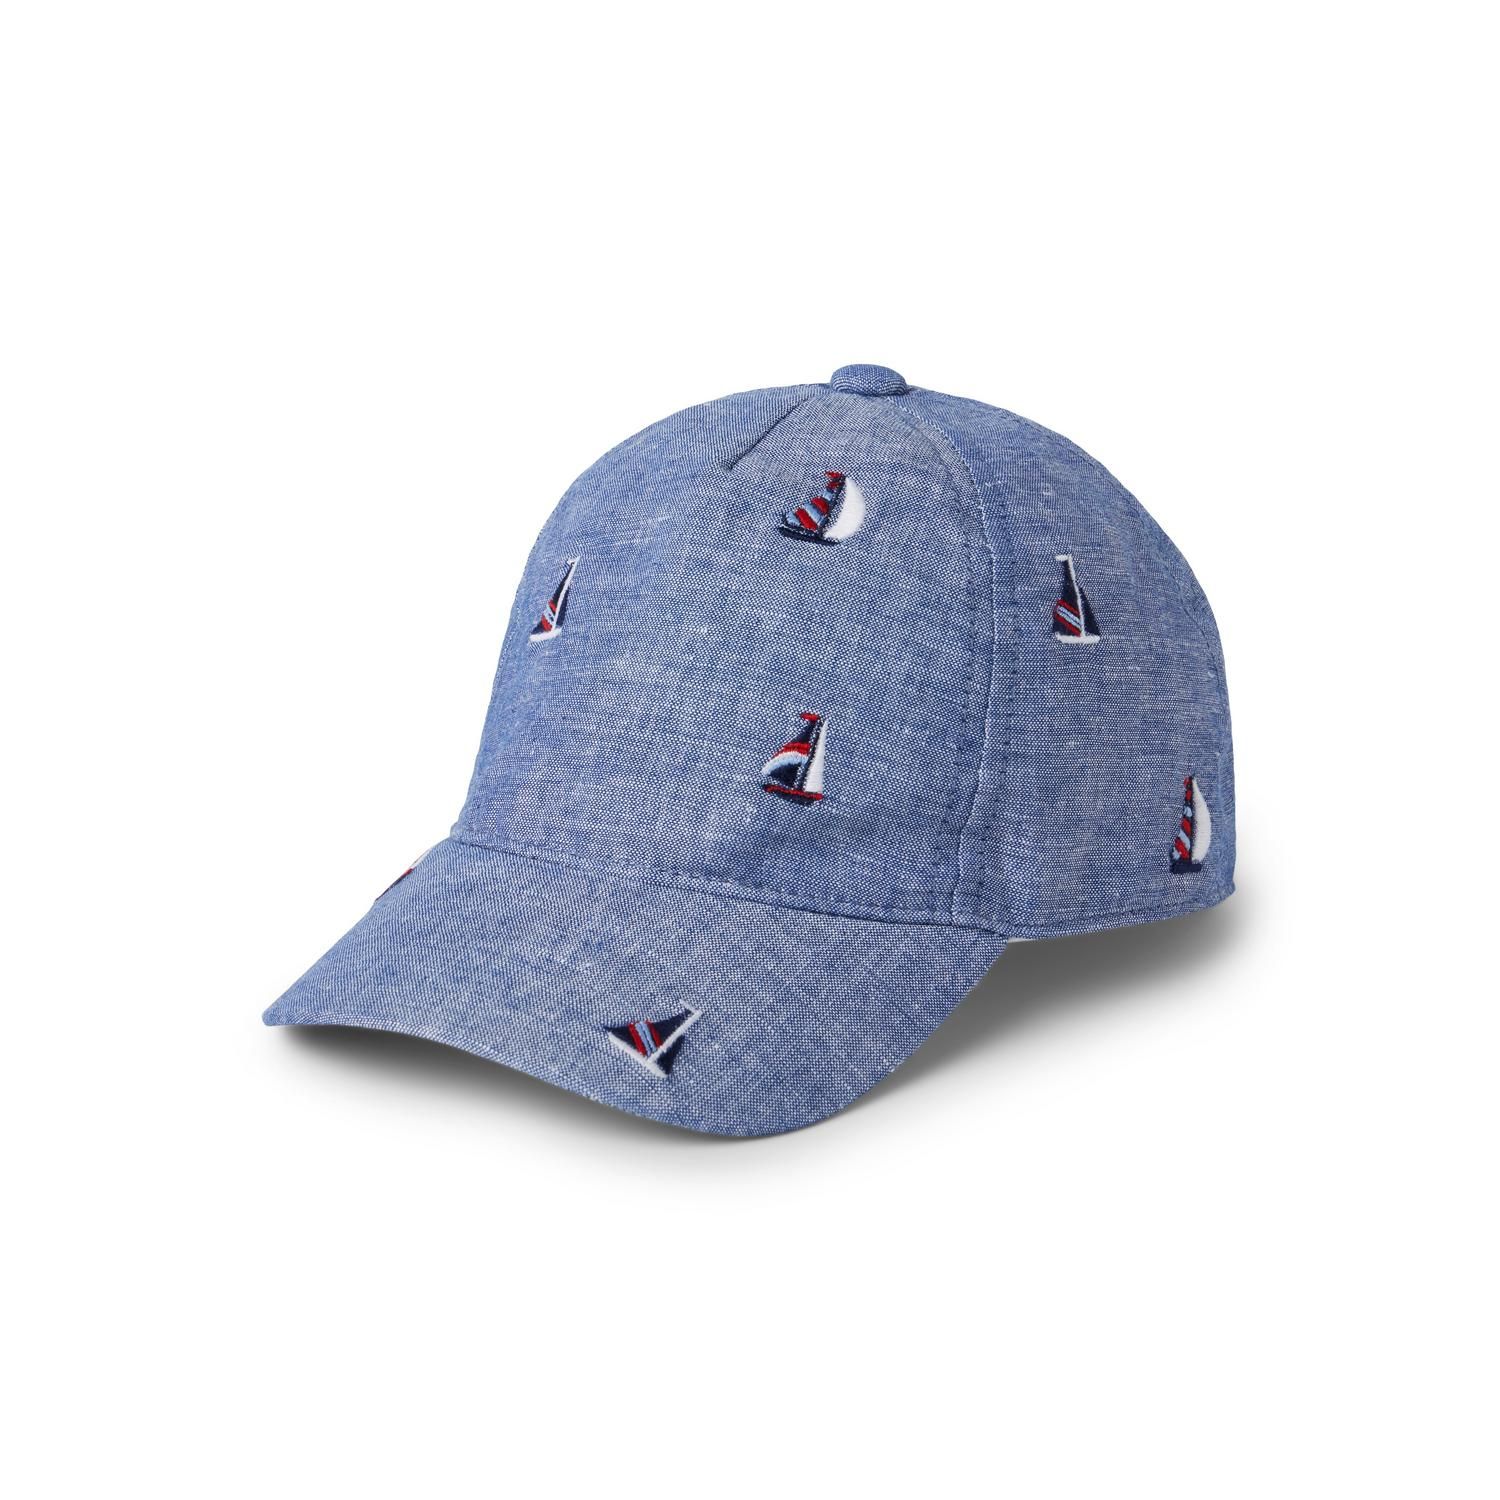 Embroidered Sailboat Cap | Janie and Jack